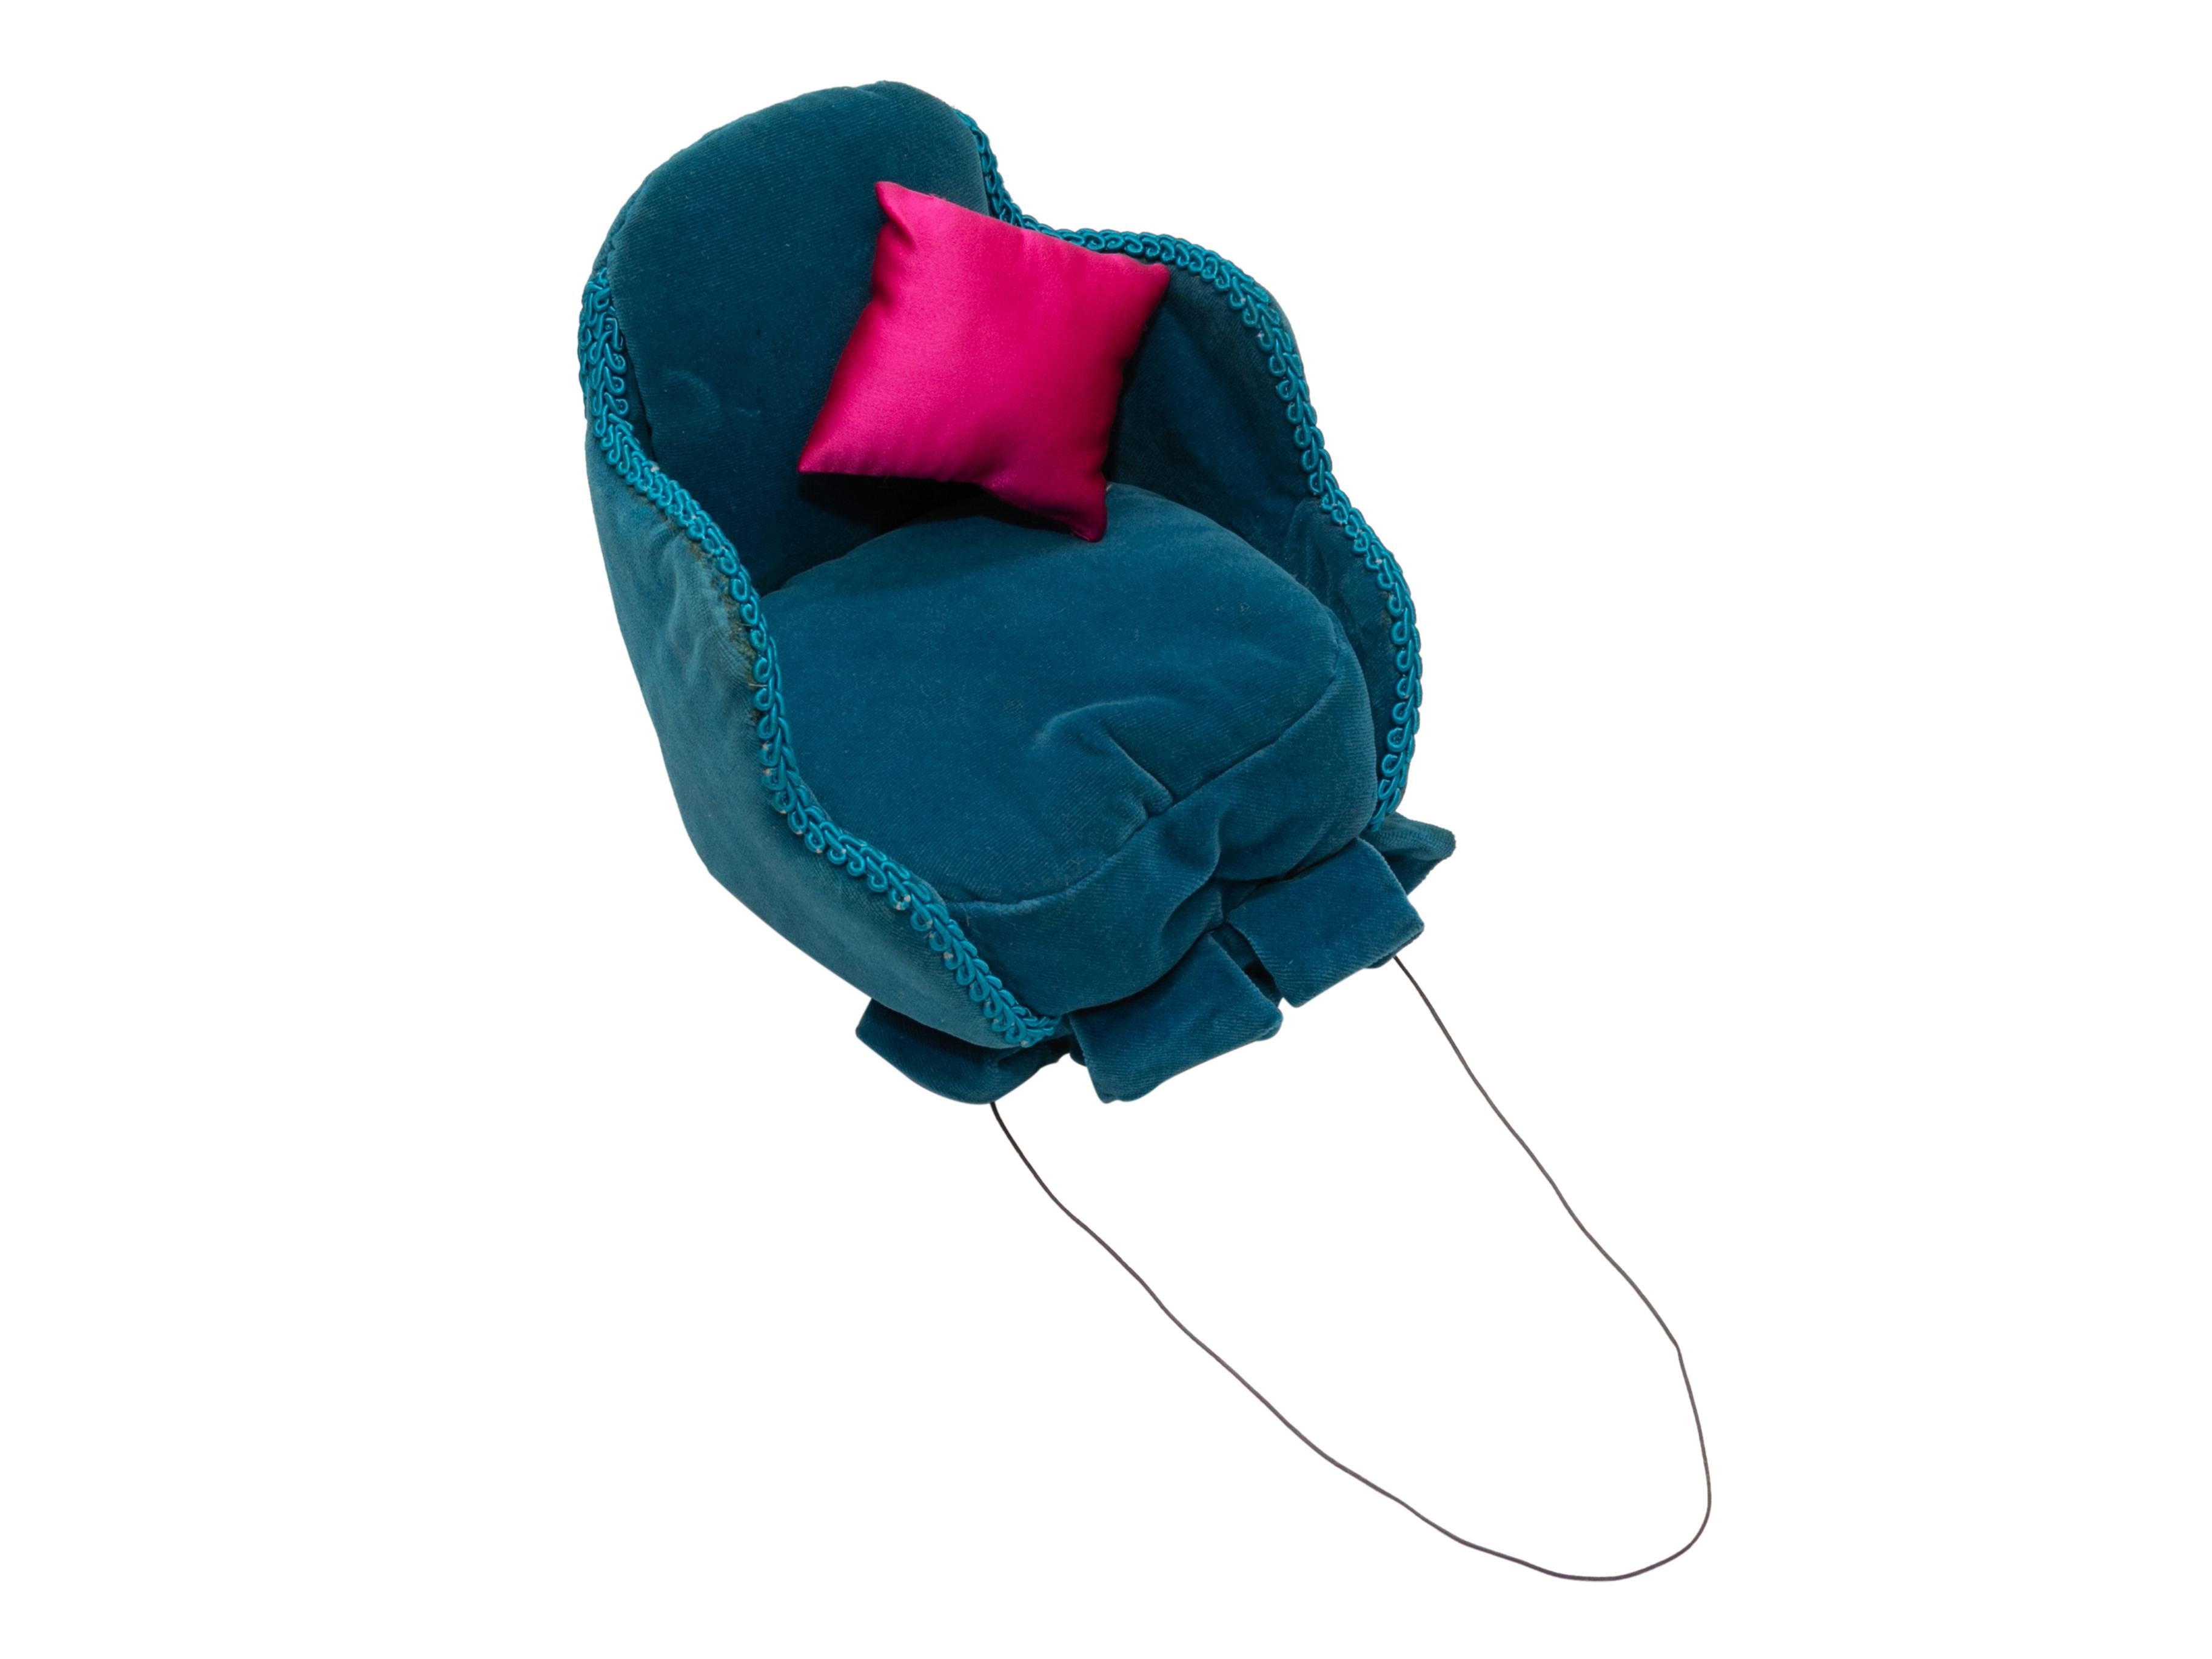 Women's Vintage Teal & Fuchsia Karl Lagerfeld 1985 Chair Hat For Sale